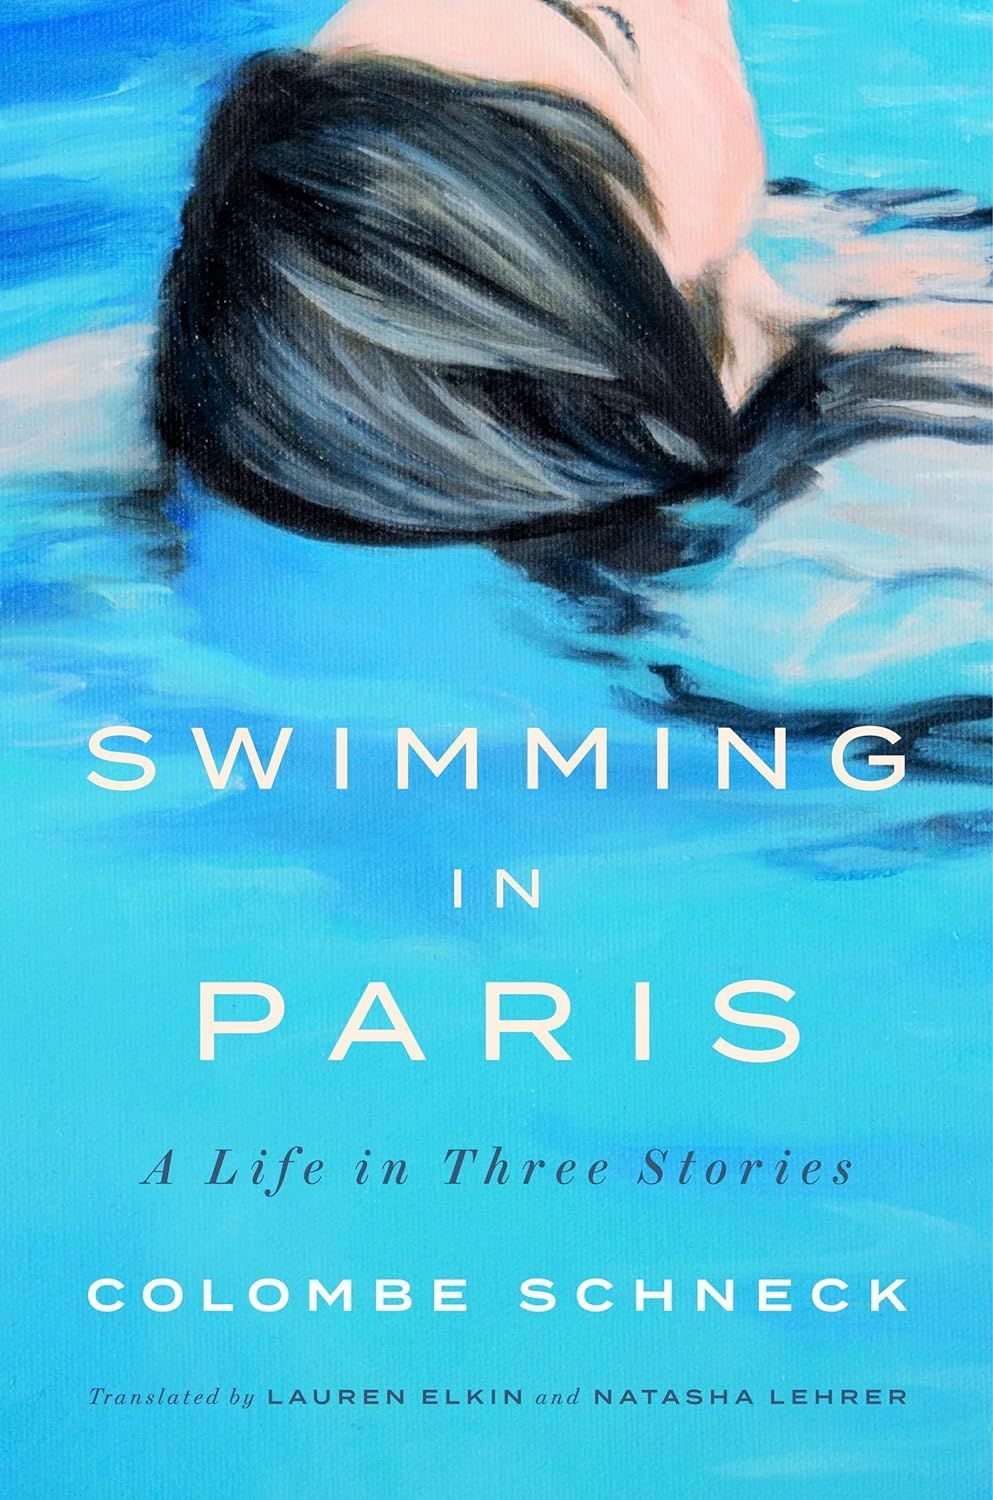 Learning Uncertainty: On Colombe Schneck’s “Swimming in Paris”